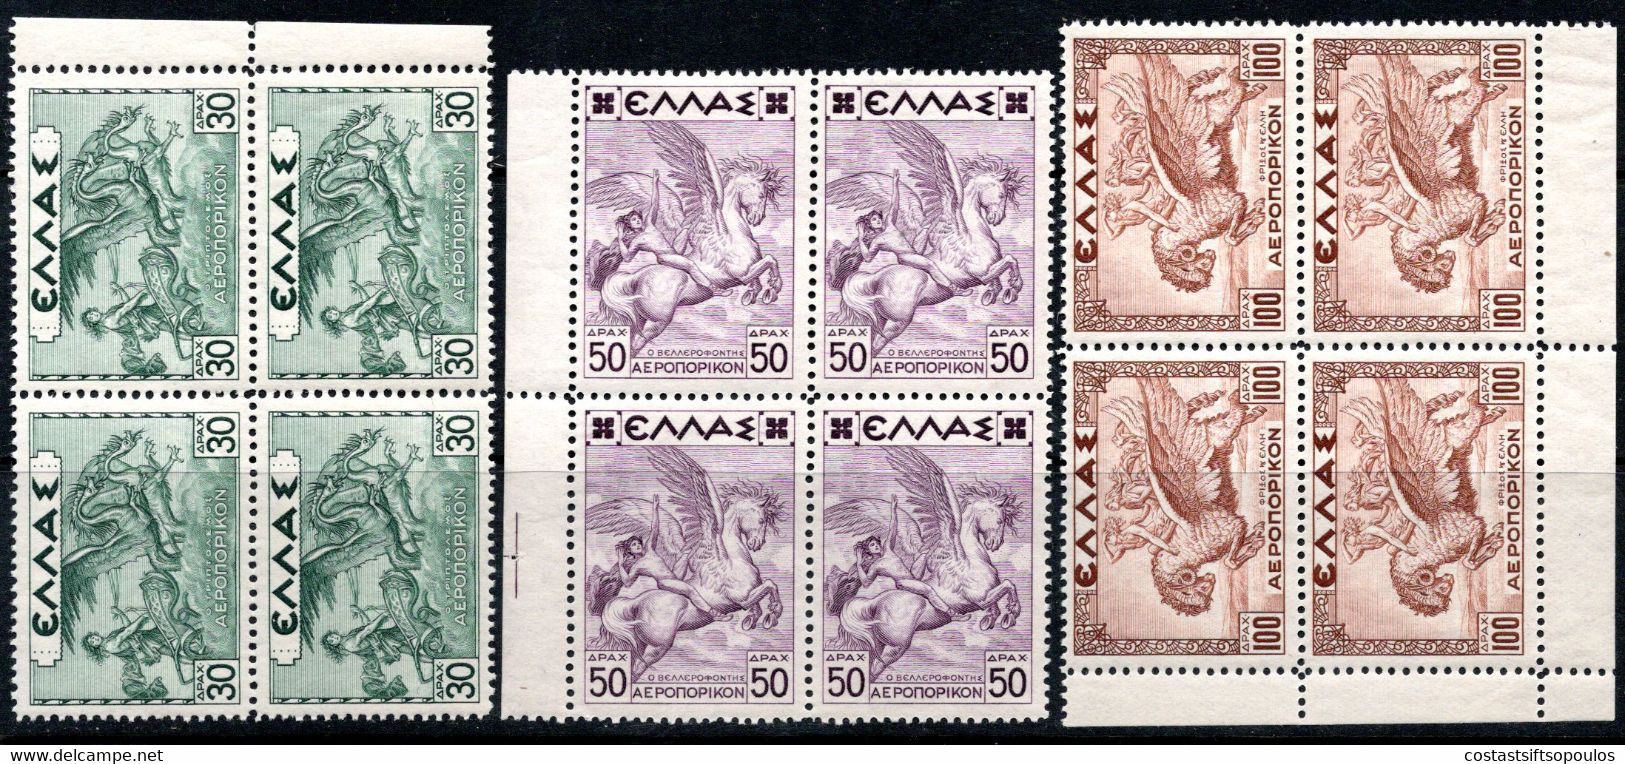 941.GREECE.1935 MYTHOLOGICAL ISSUE # 22-30 BLOCKS OF 4 (3 MNH,1 MH)4 SCANS - Unused Stamps